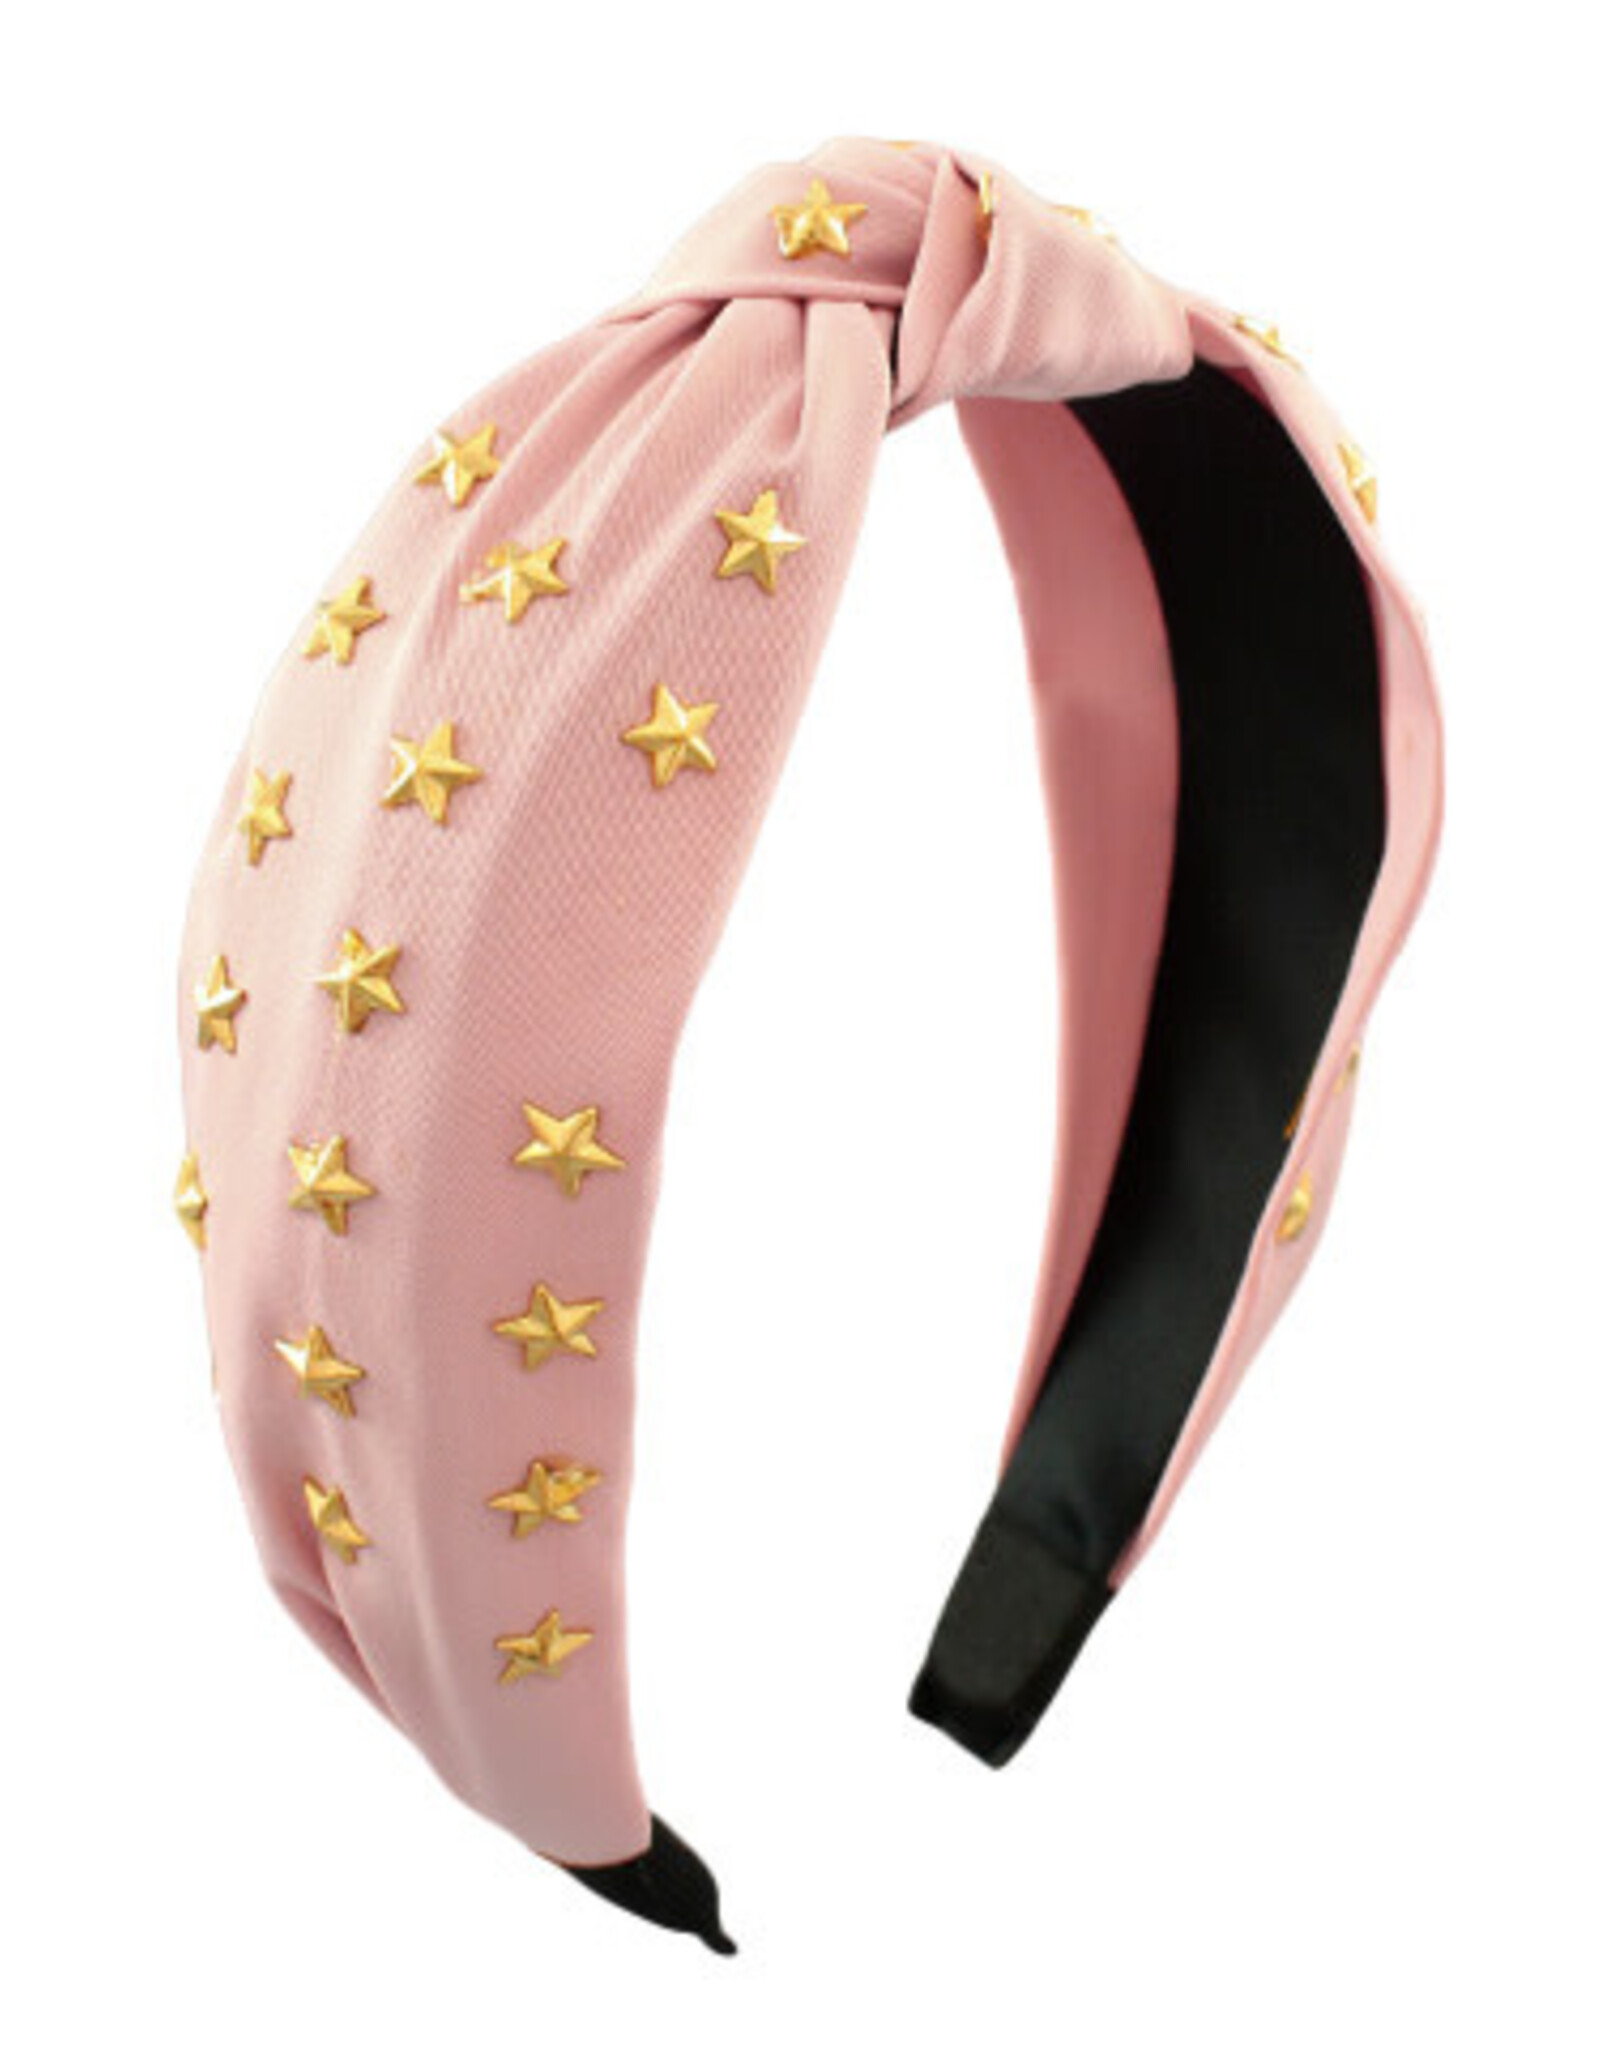 Star Studded Knotted Headband in Blush